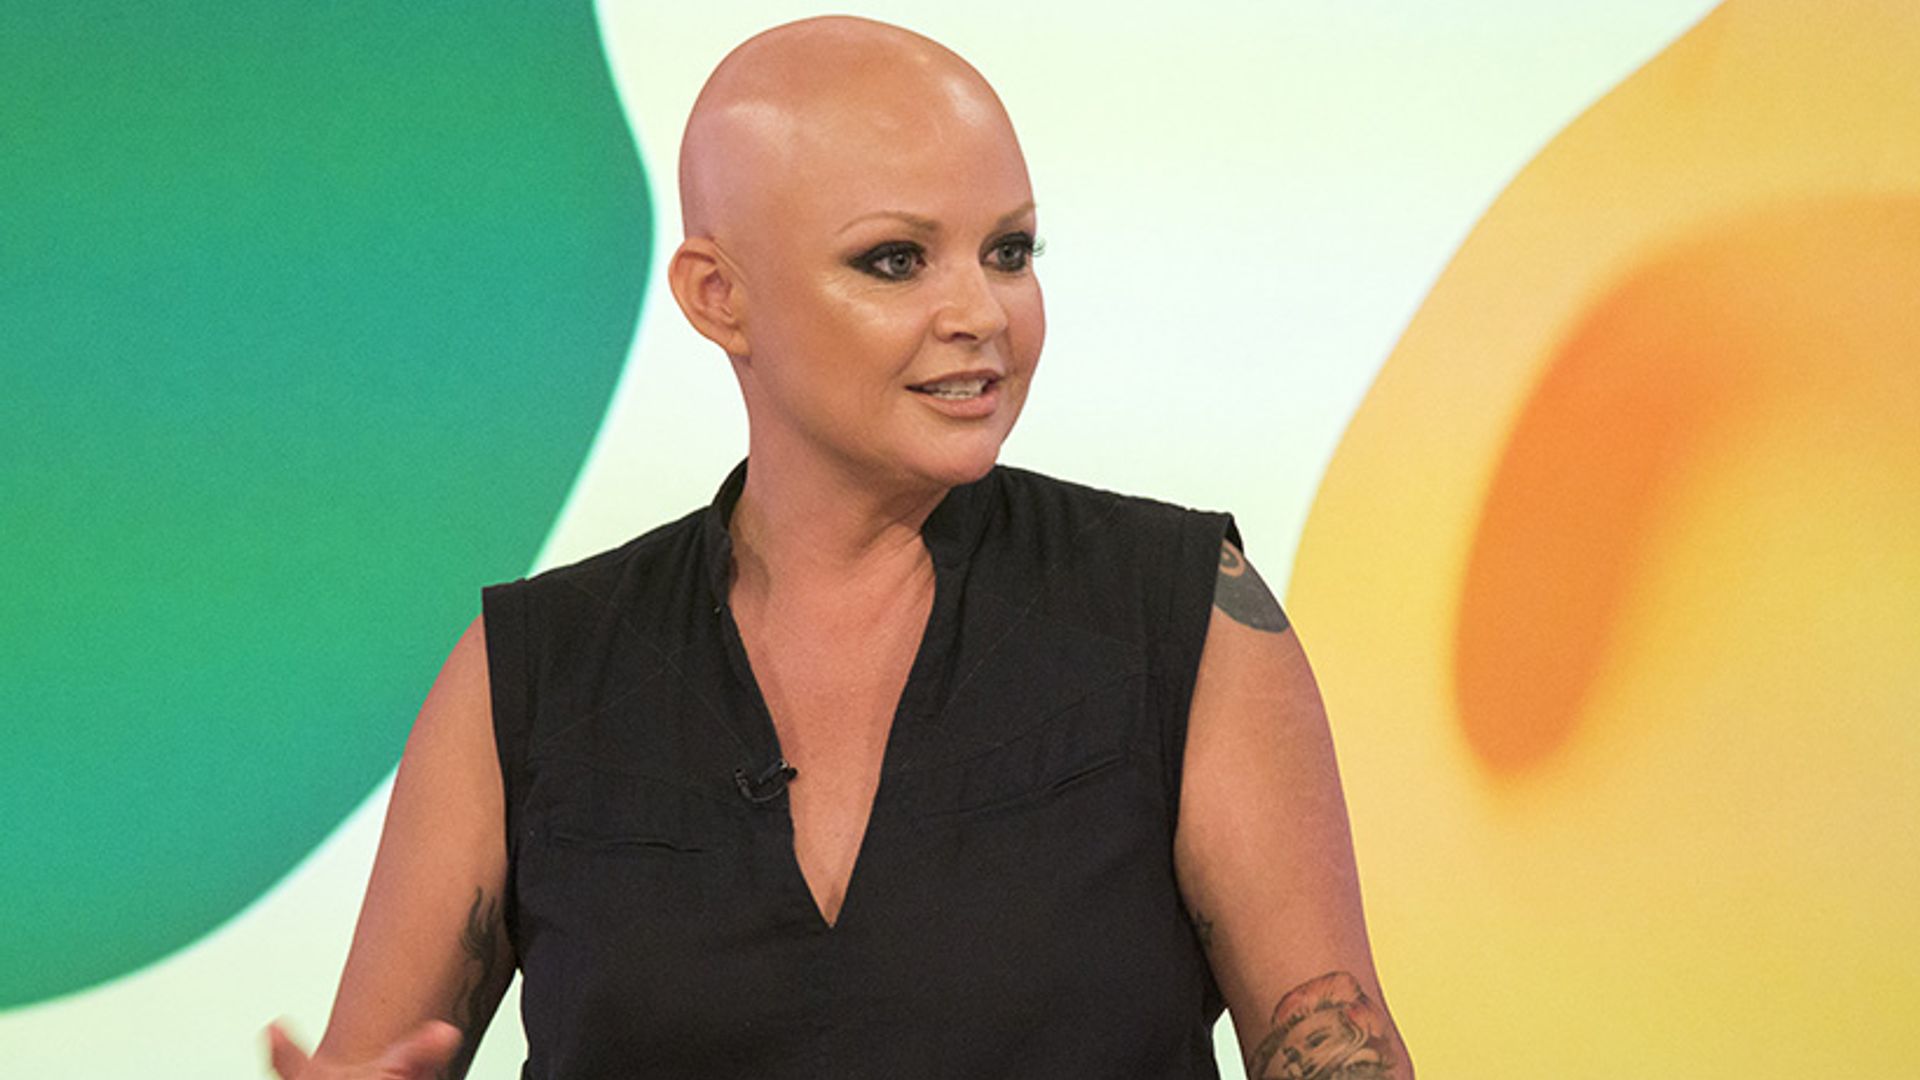 Gail Porter opens up about her battle with anorexia